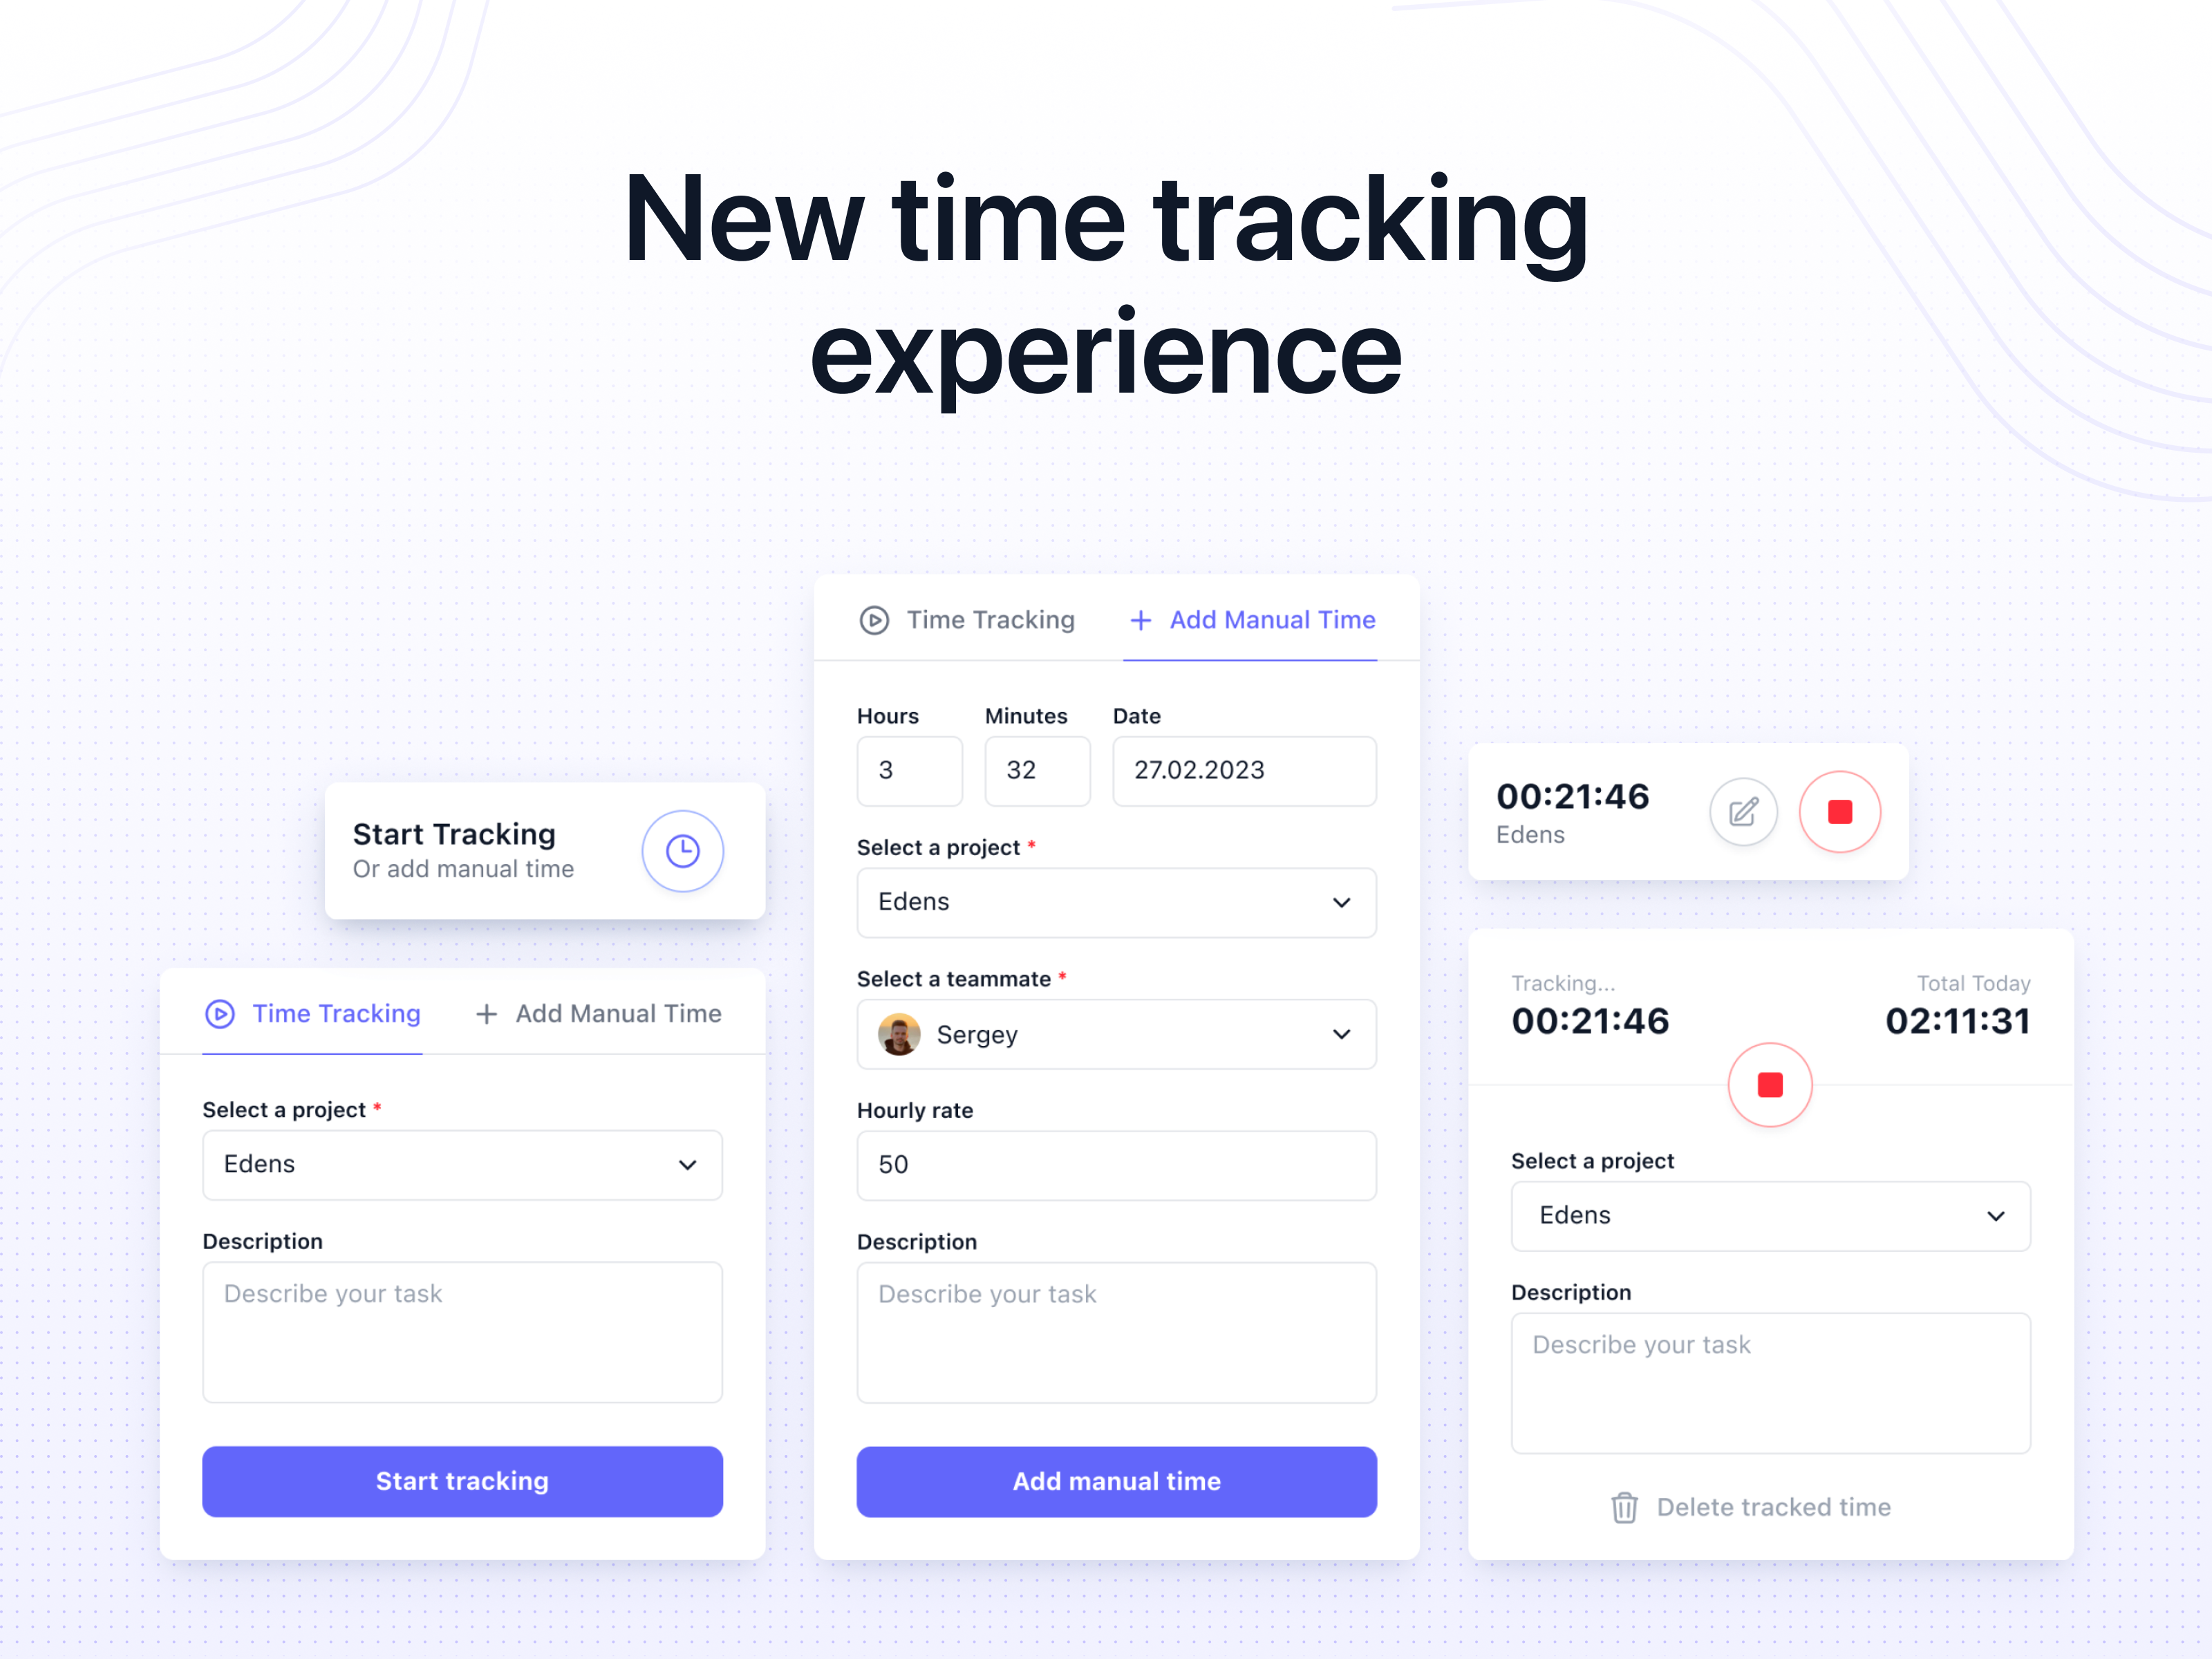 Loved by teams that appreciate productivity and freedom. No spying or activity monitoring. Track time during the day using app or just log it in manually later if you forgot to activate tracker. No worries!